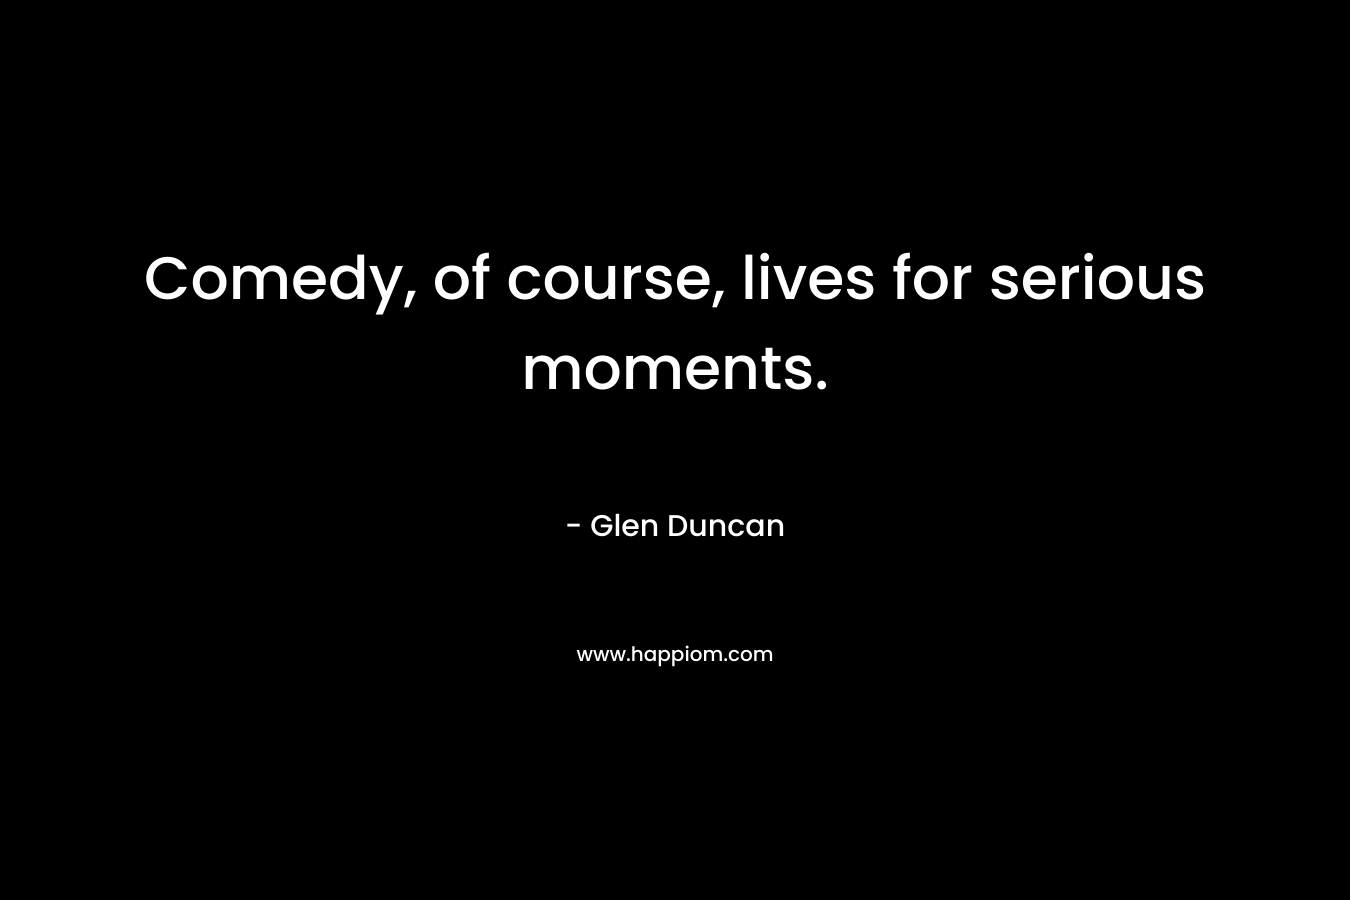 Comedy, of course, lives for serious moments. – Glen Duncan